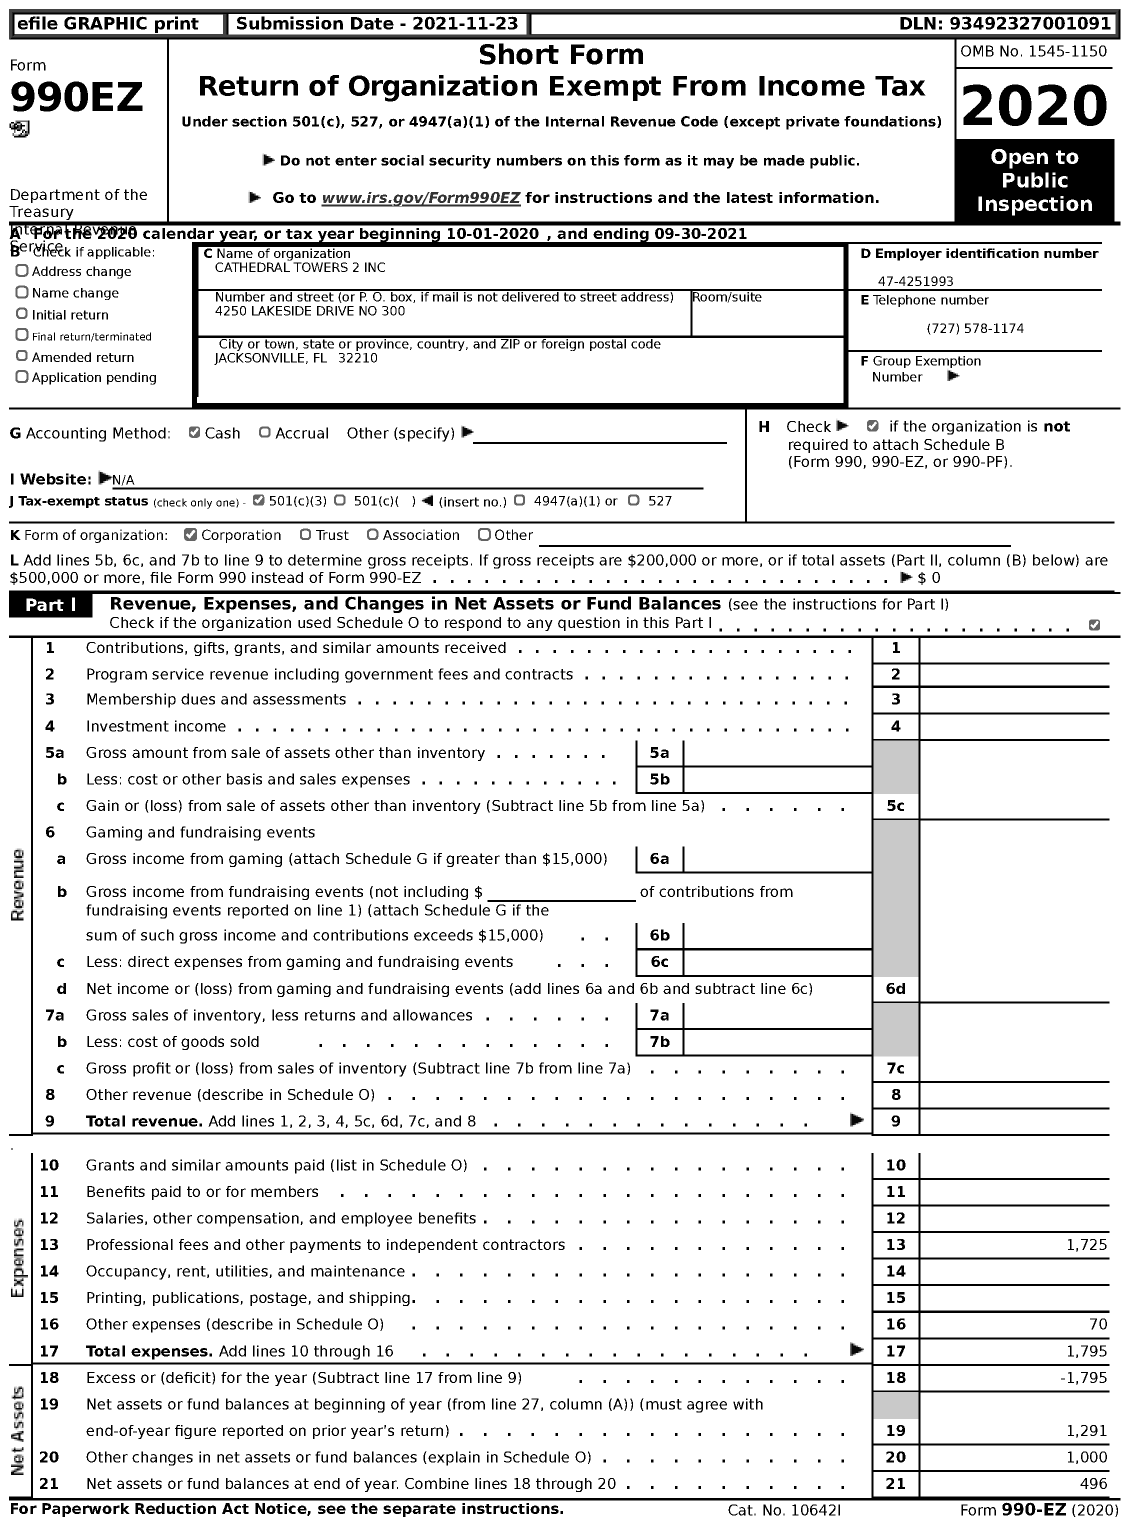 Image of first page of 2020 Form 990EZ for Cathedral Towers 2